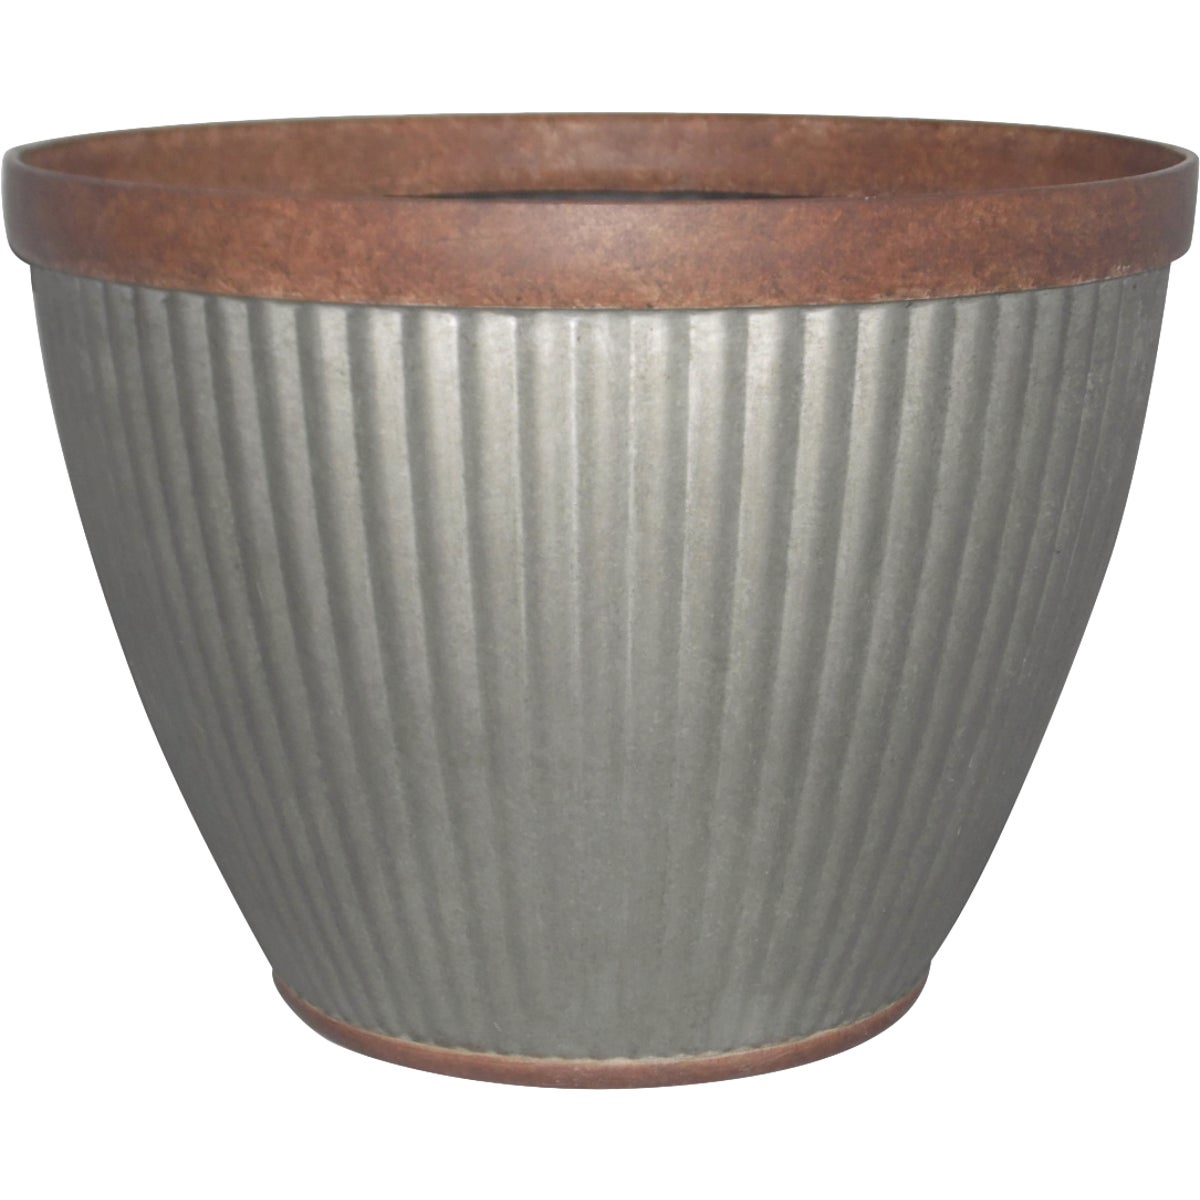 Southern Patio Westlake 10 In. Resin Rustic Galvanized Round Pleated Planter